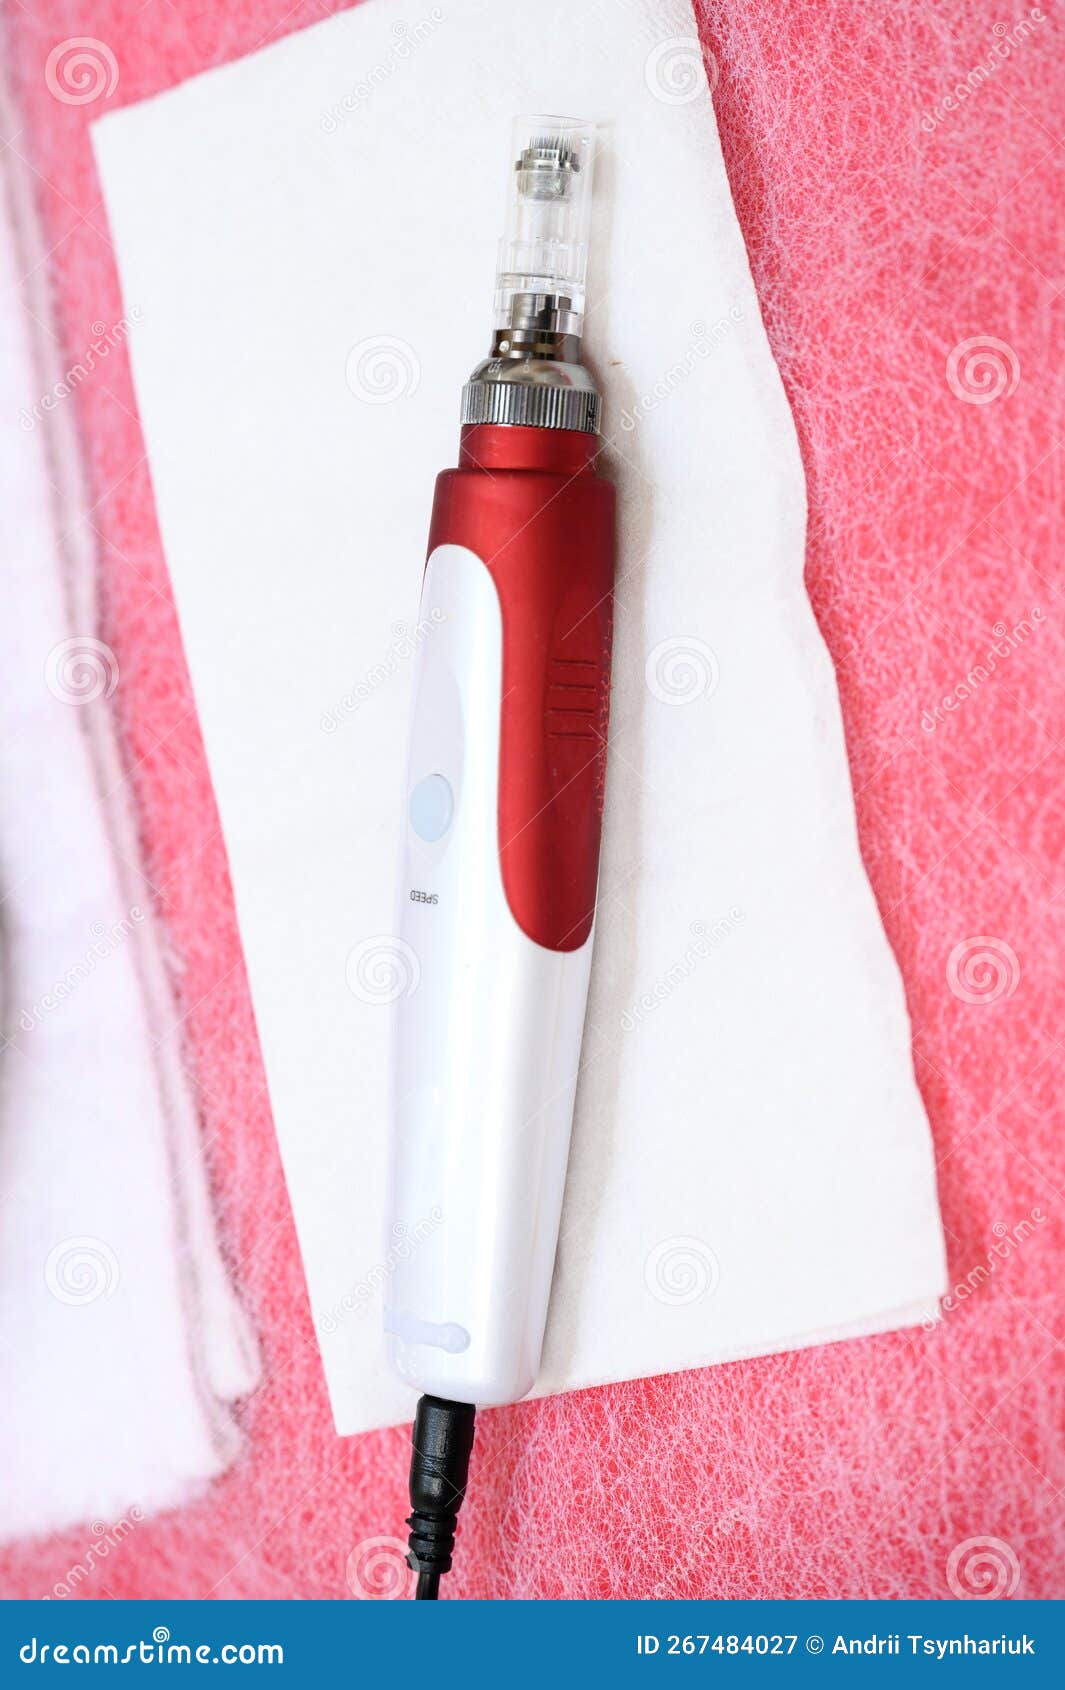 cosmetology device for dermapen mesotherapy close-up.